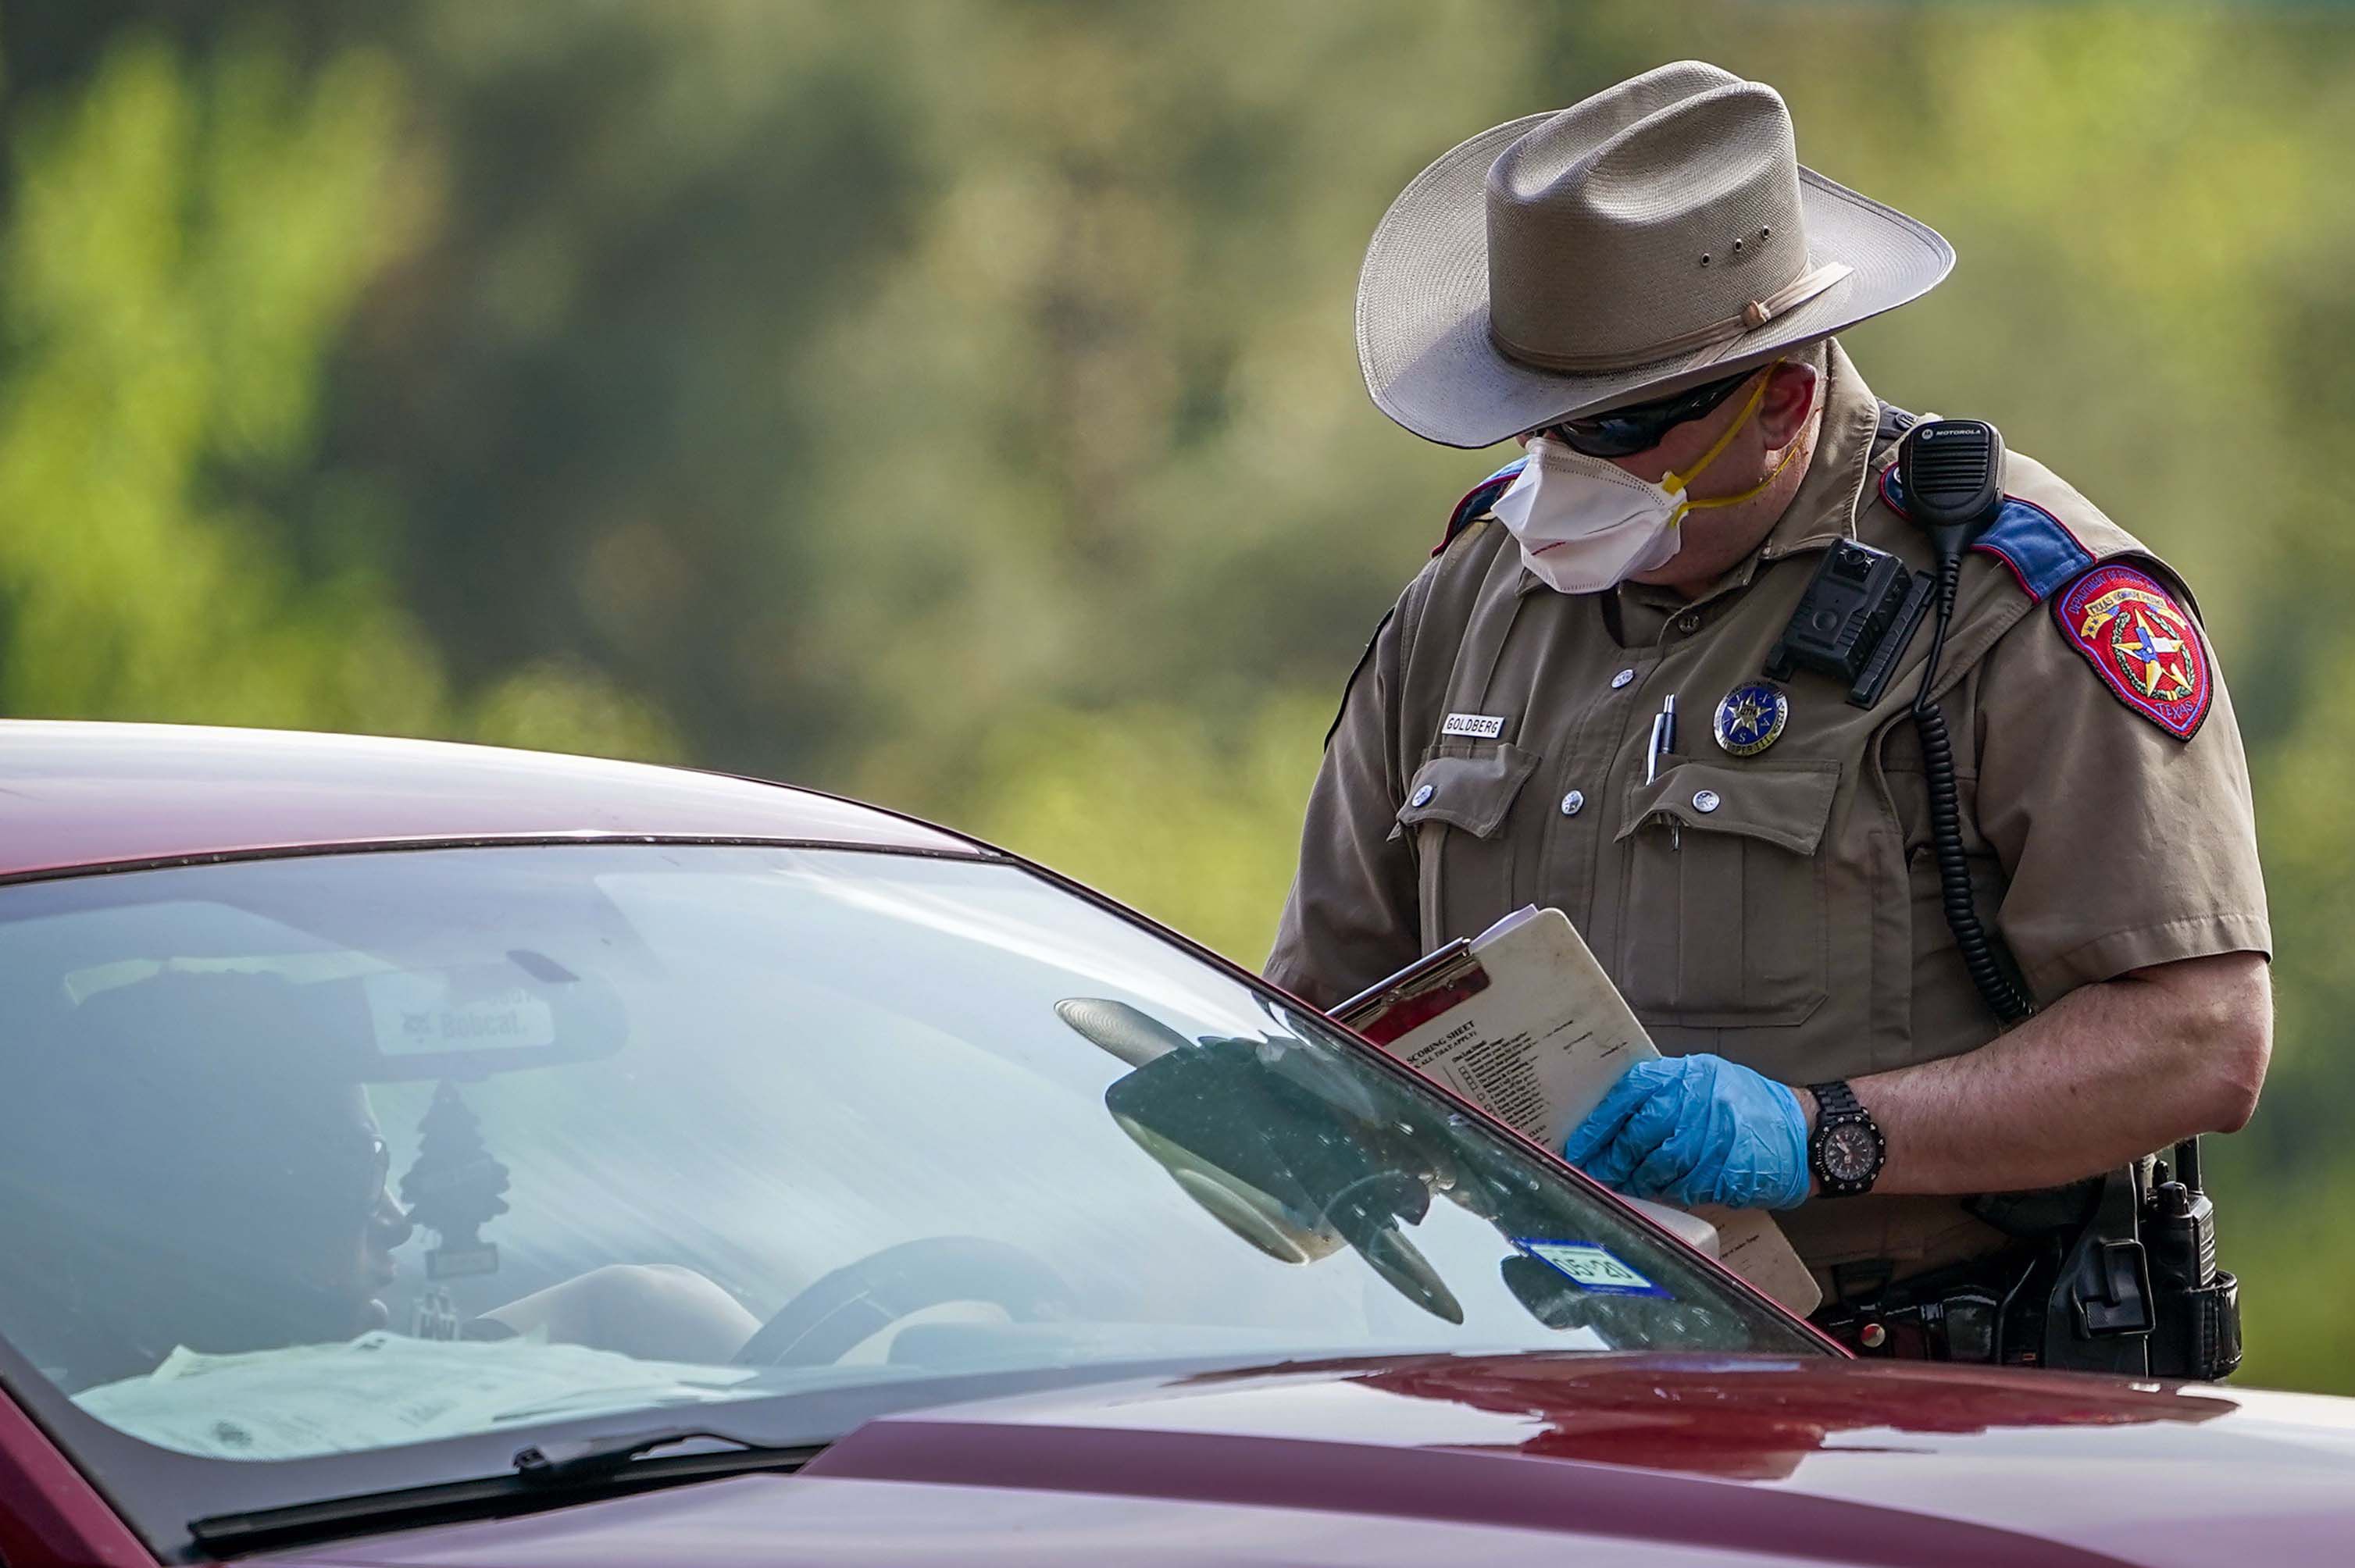 Texas Ranger shortage: Where have state troopers gone? Where the